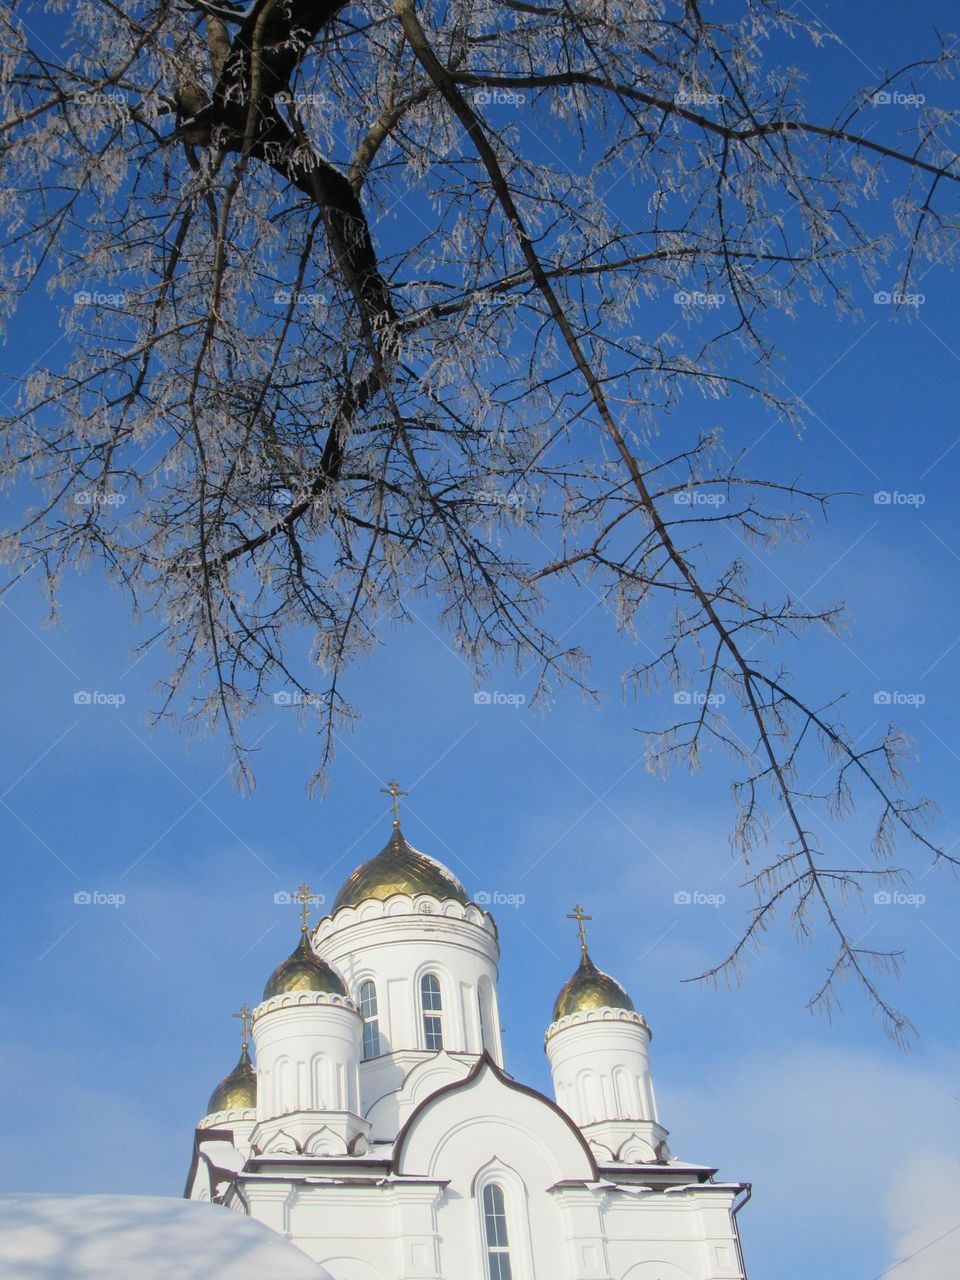 Orthodox church in Russia, Voronezh city, winter, frost, cold, sky, domes, snow on trees